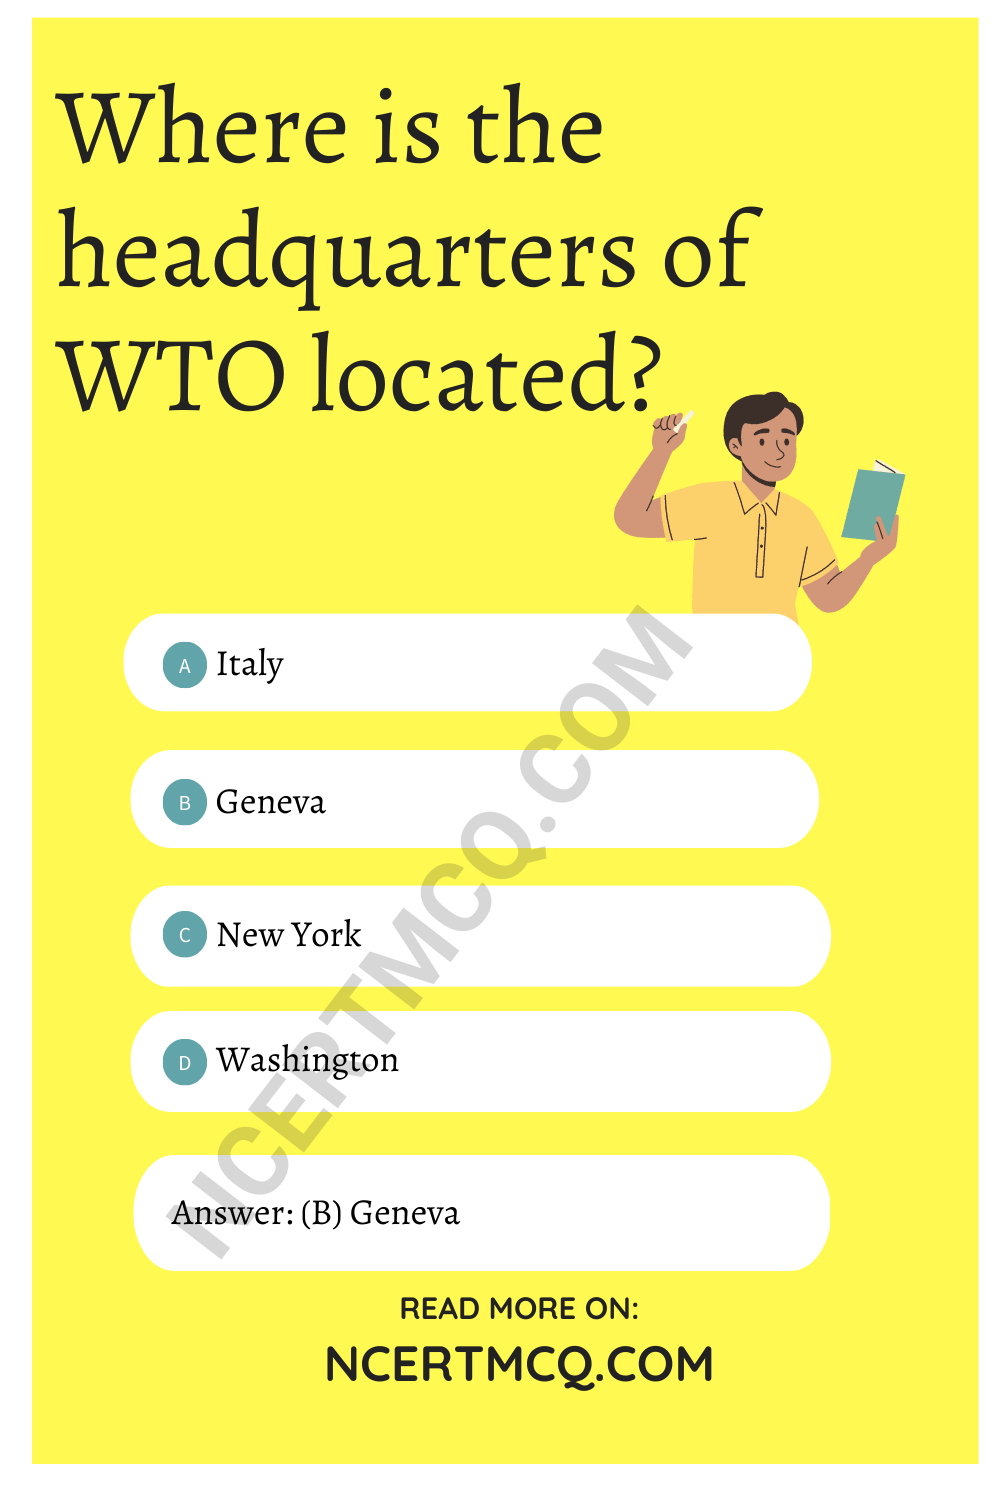 Where is the headquarters of WTO located?